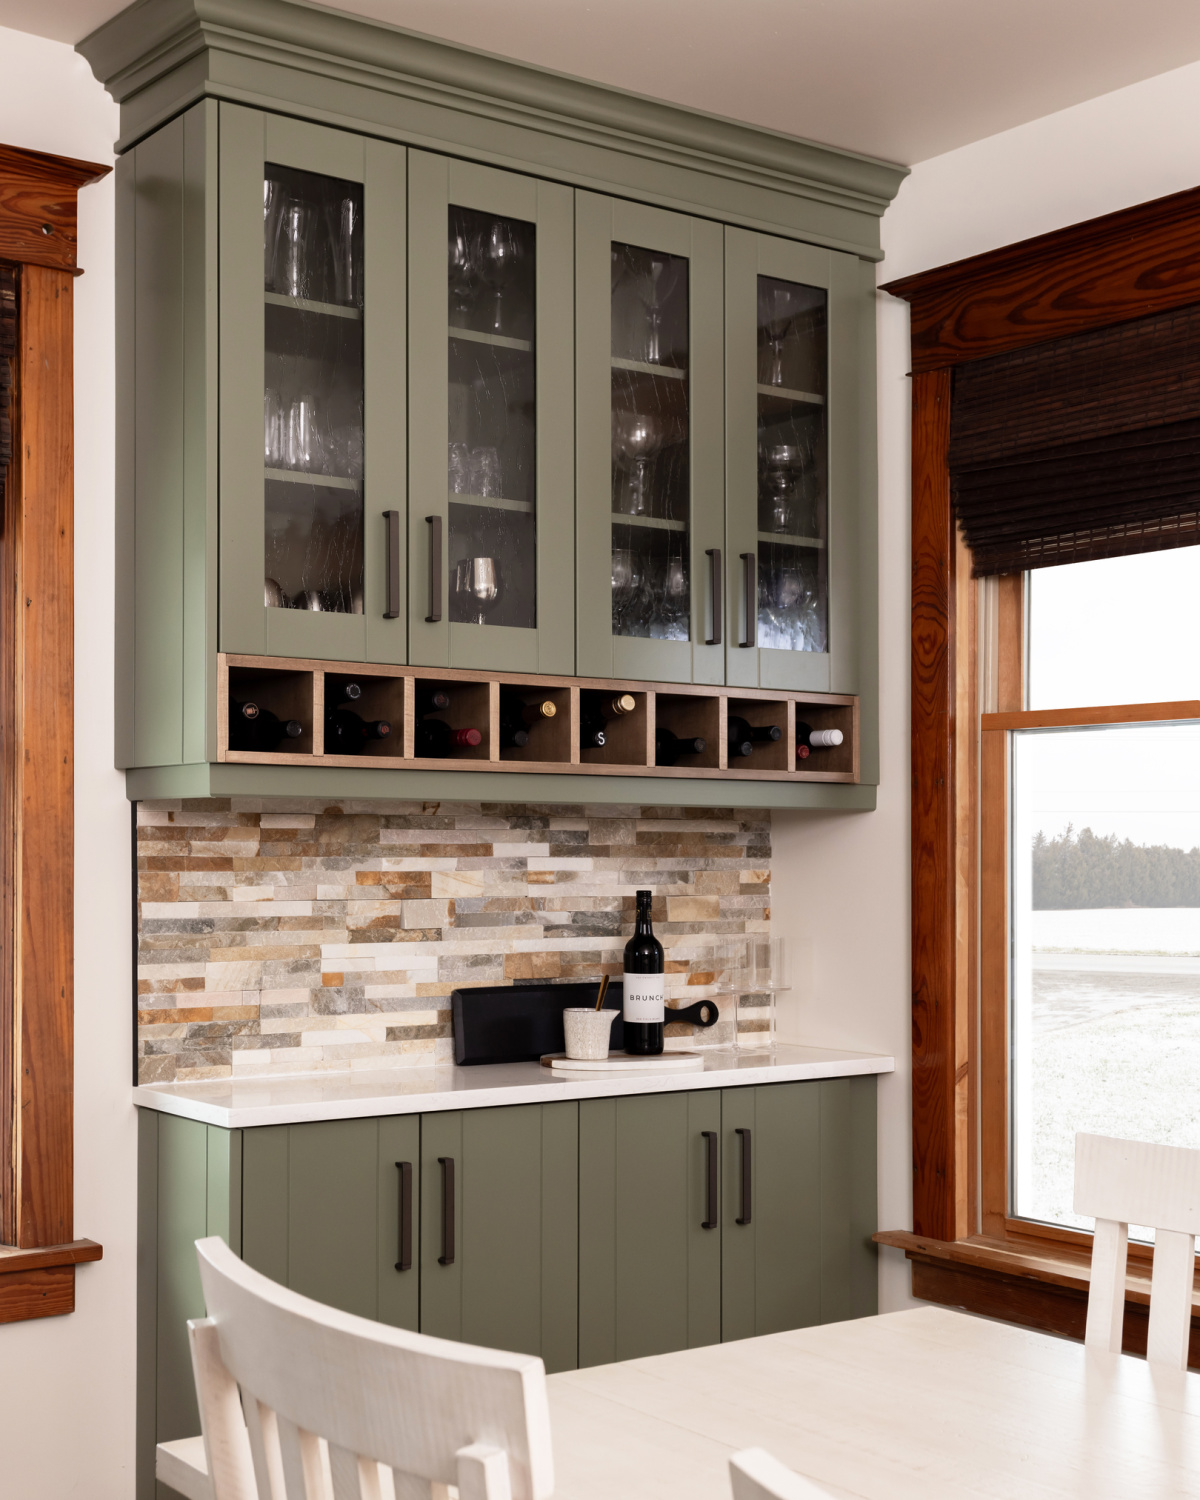 Built-in bar area with glass and green cabinets.